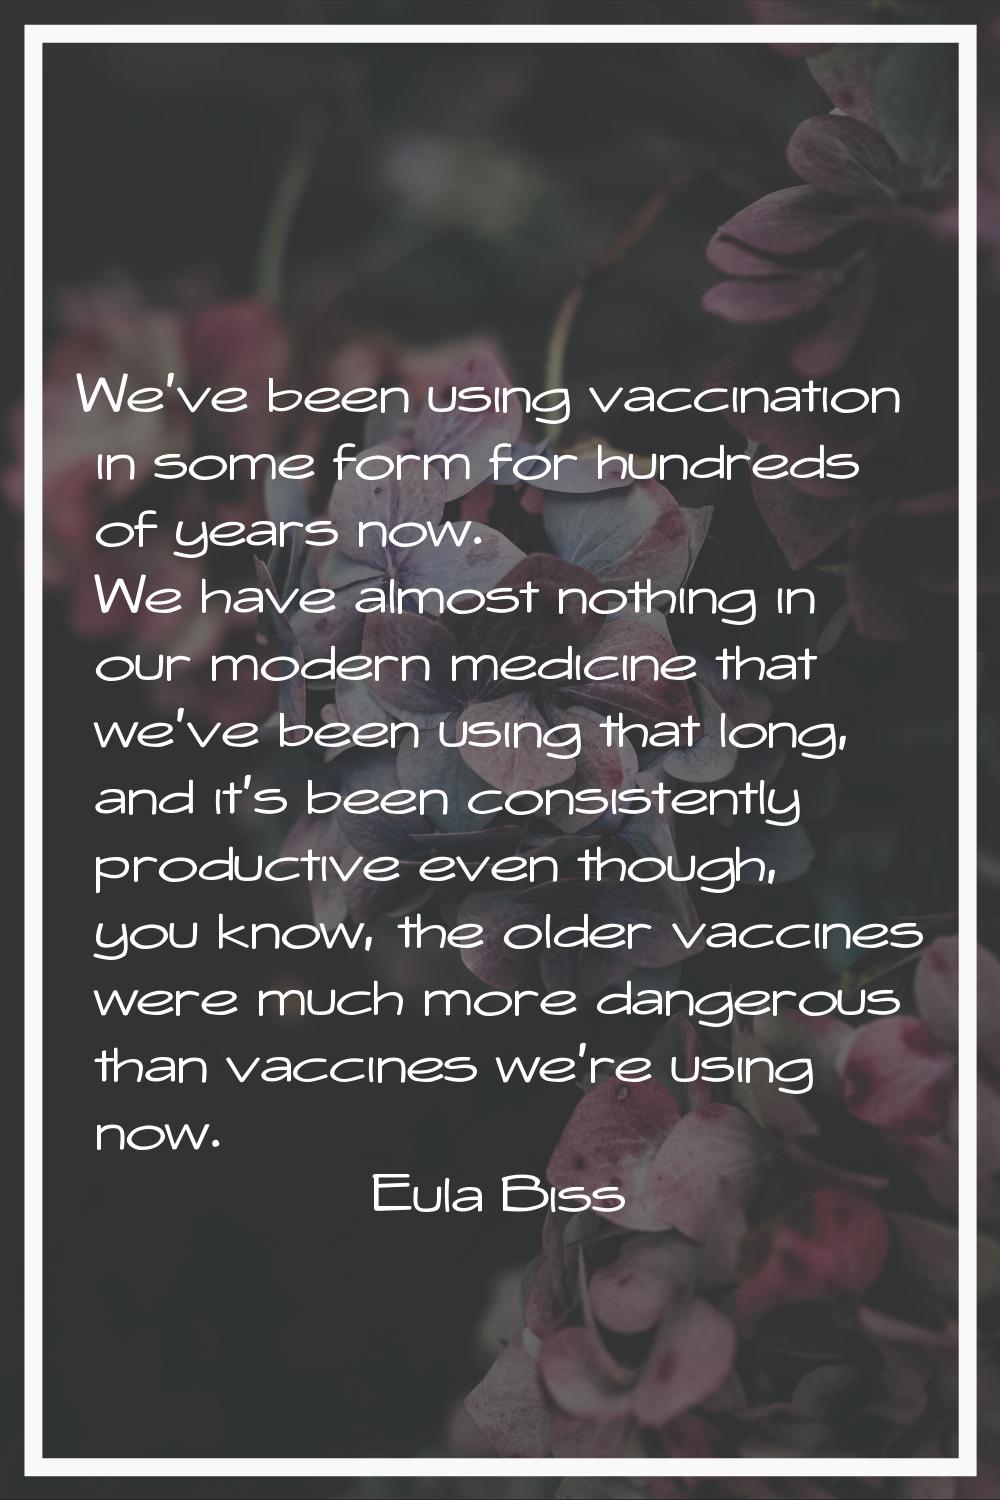 We've been using vaccination in some form for hundreds of years now. We have almost nothing in our 